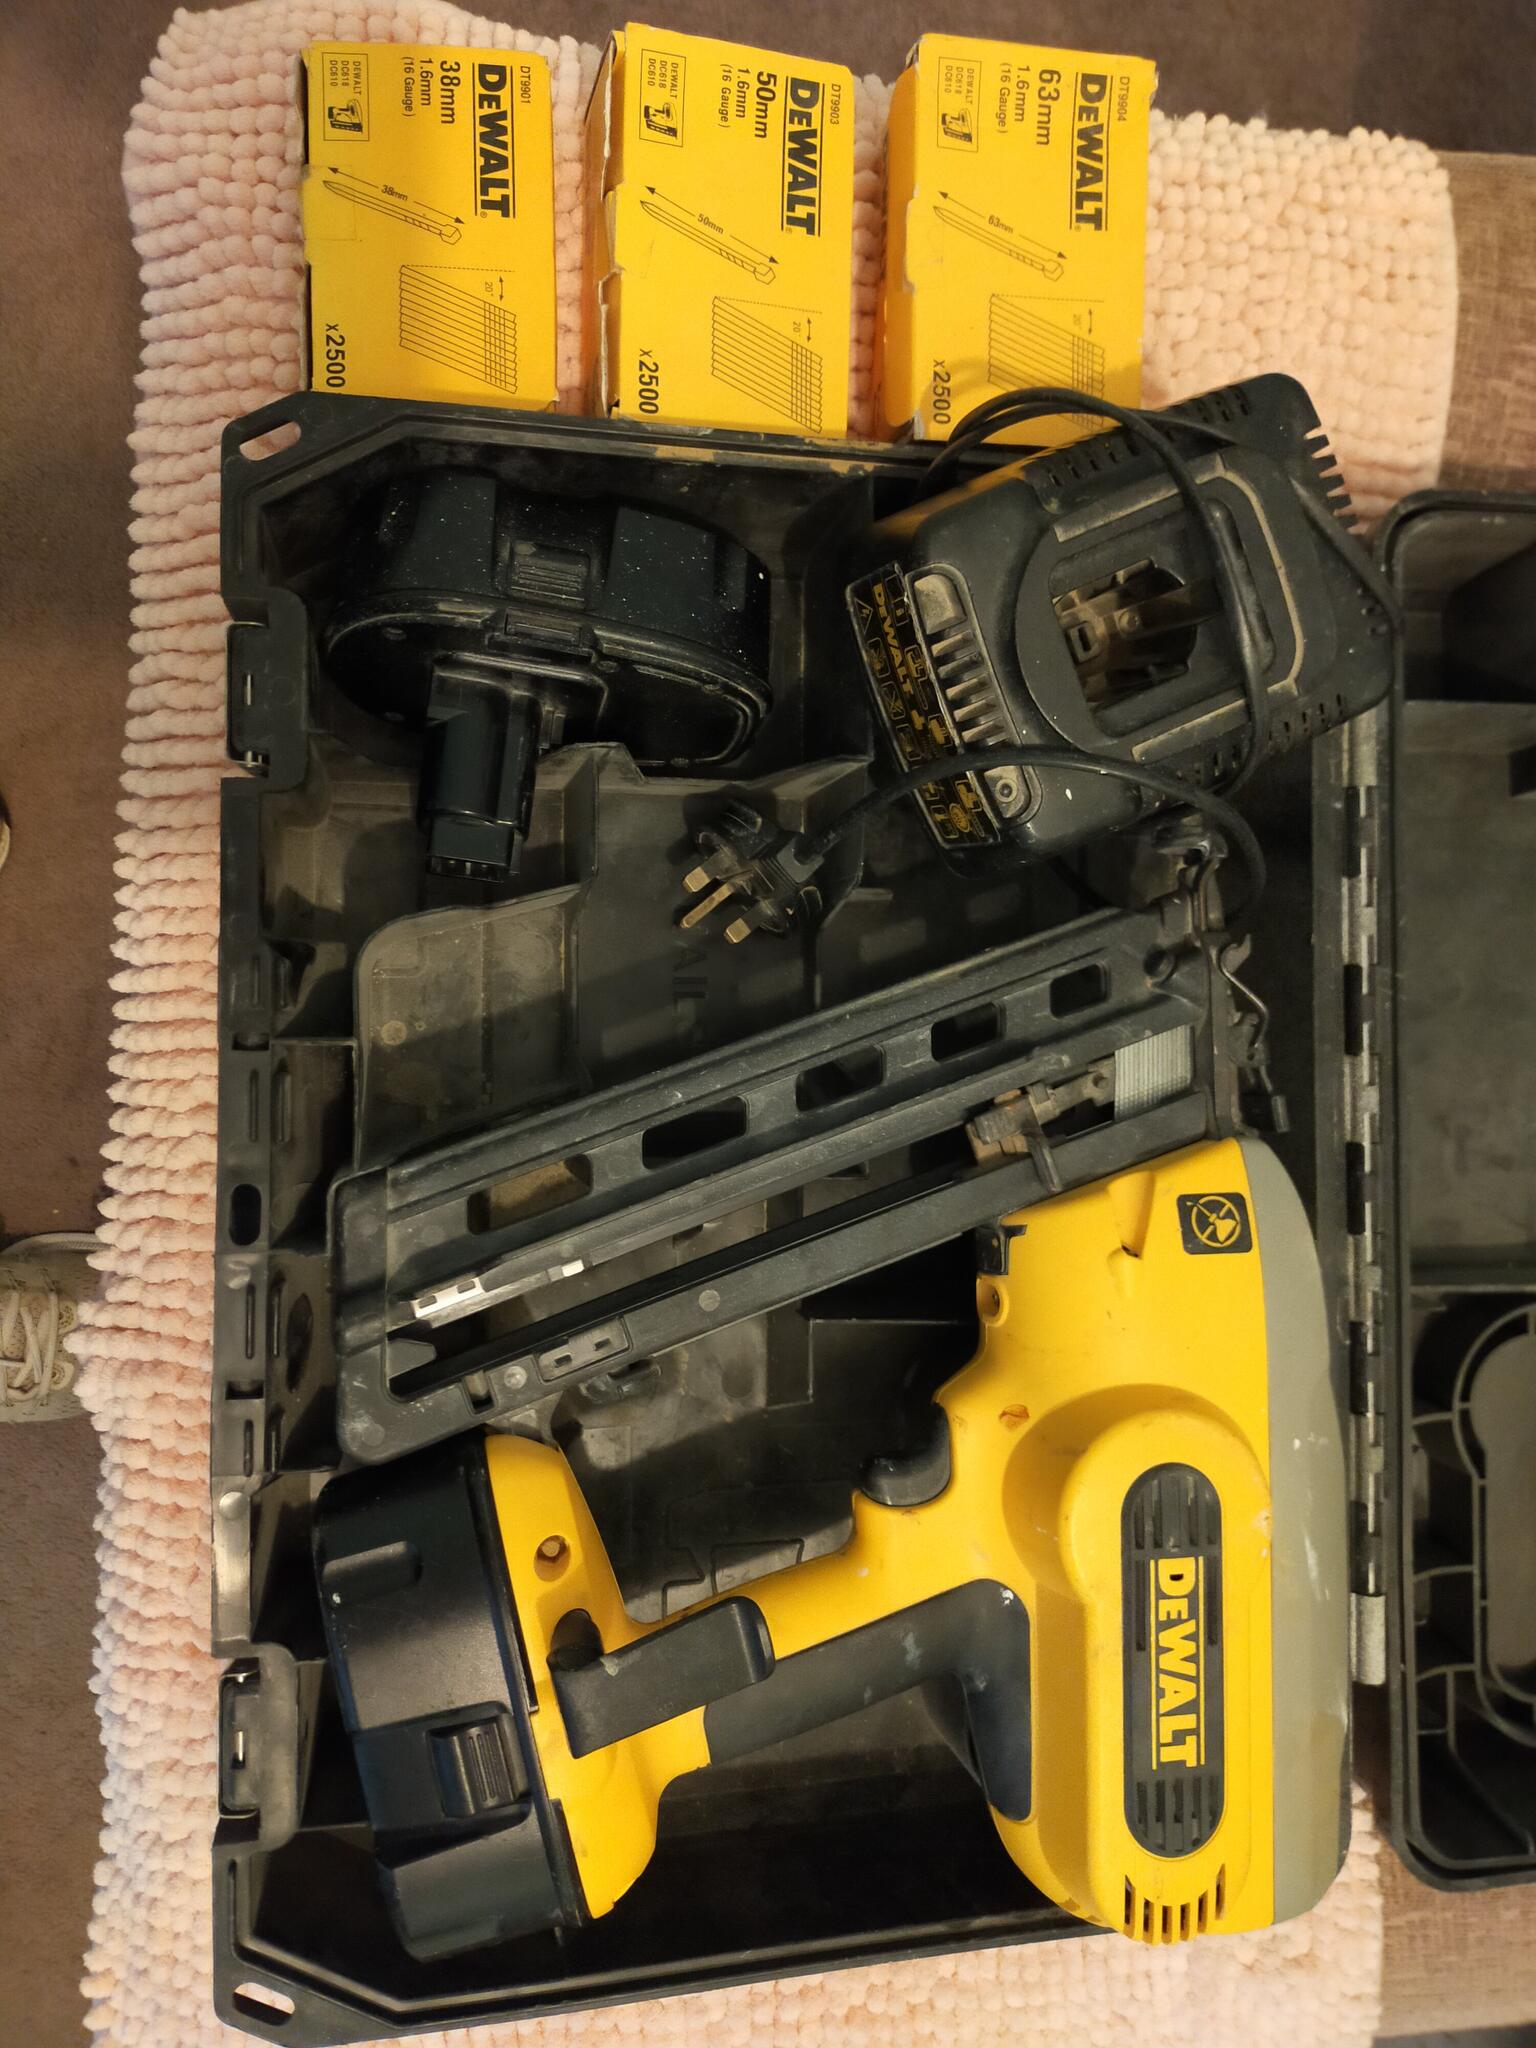 Dewalt 2nd Fix Nailer Review: Is it Worth the Investment? - YouTube